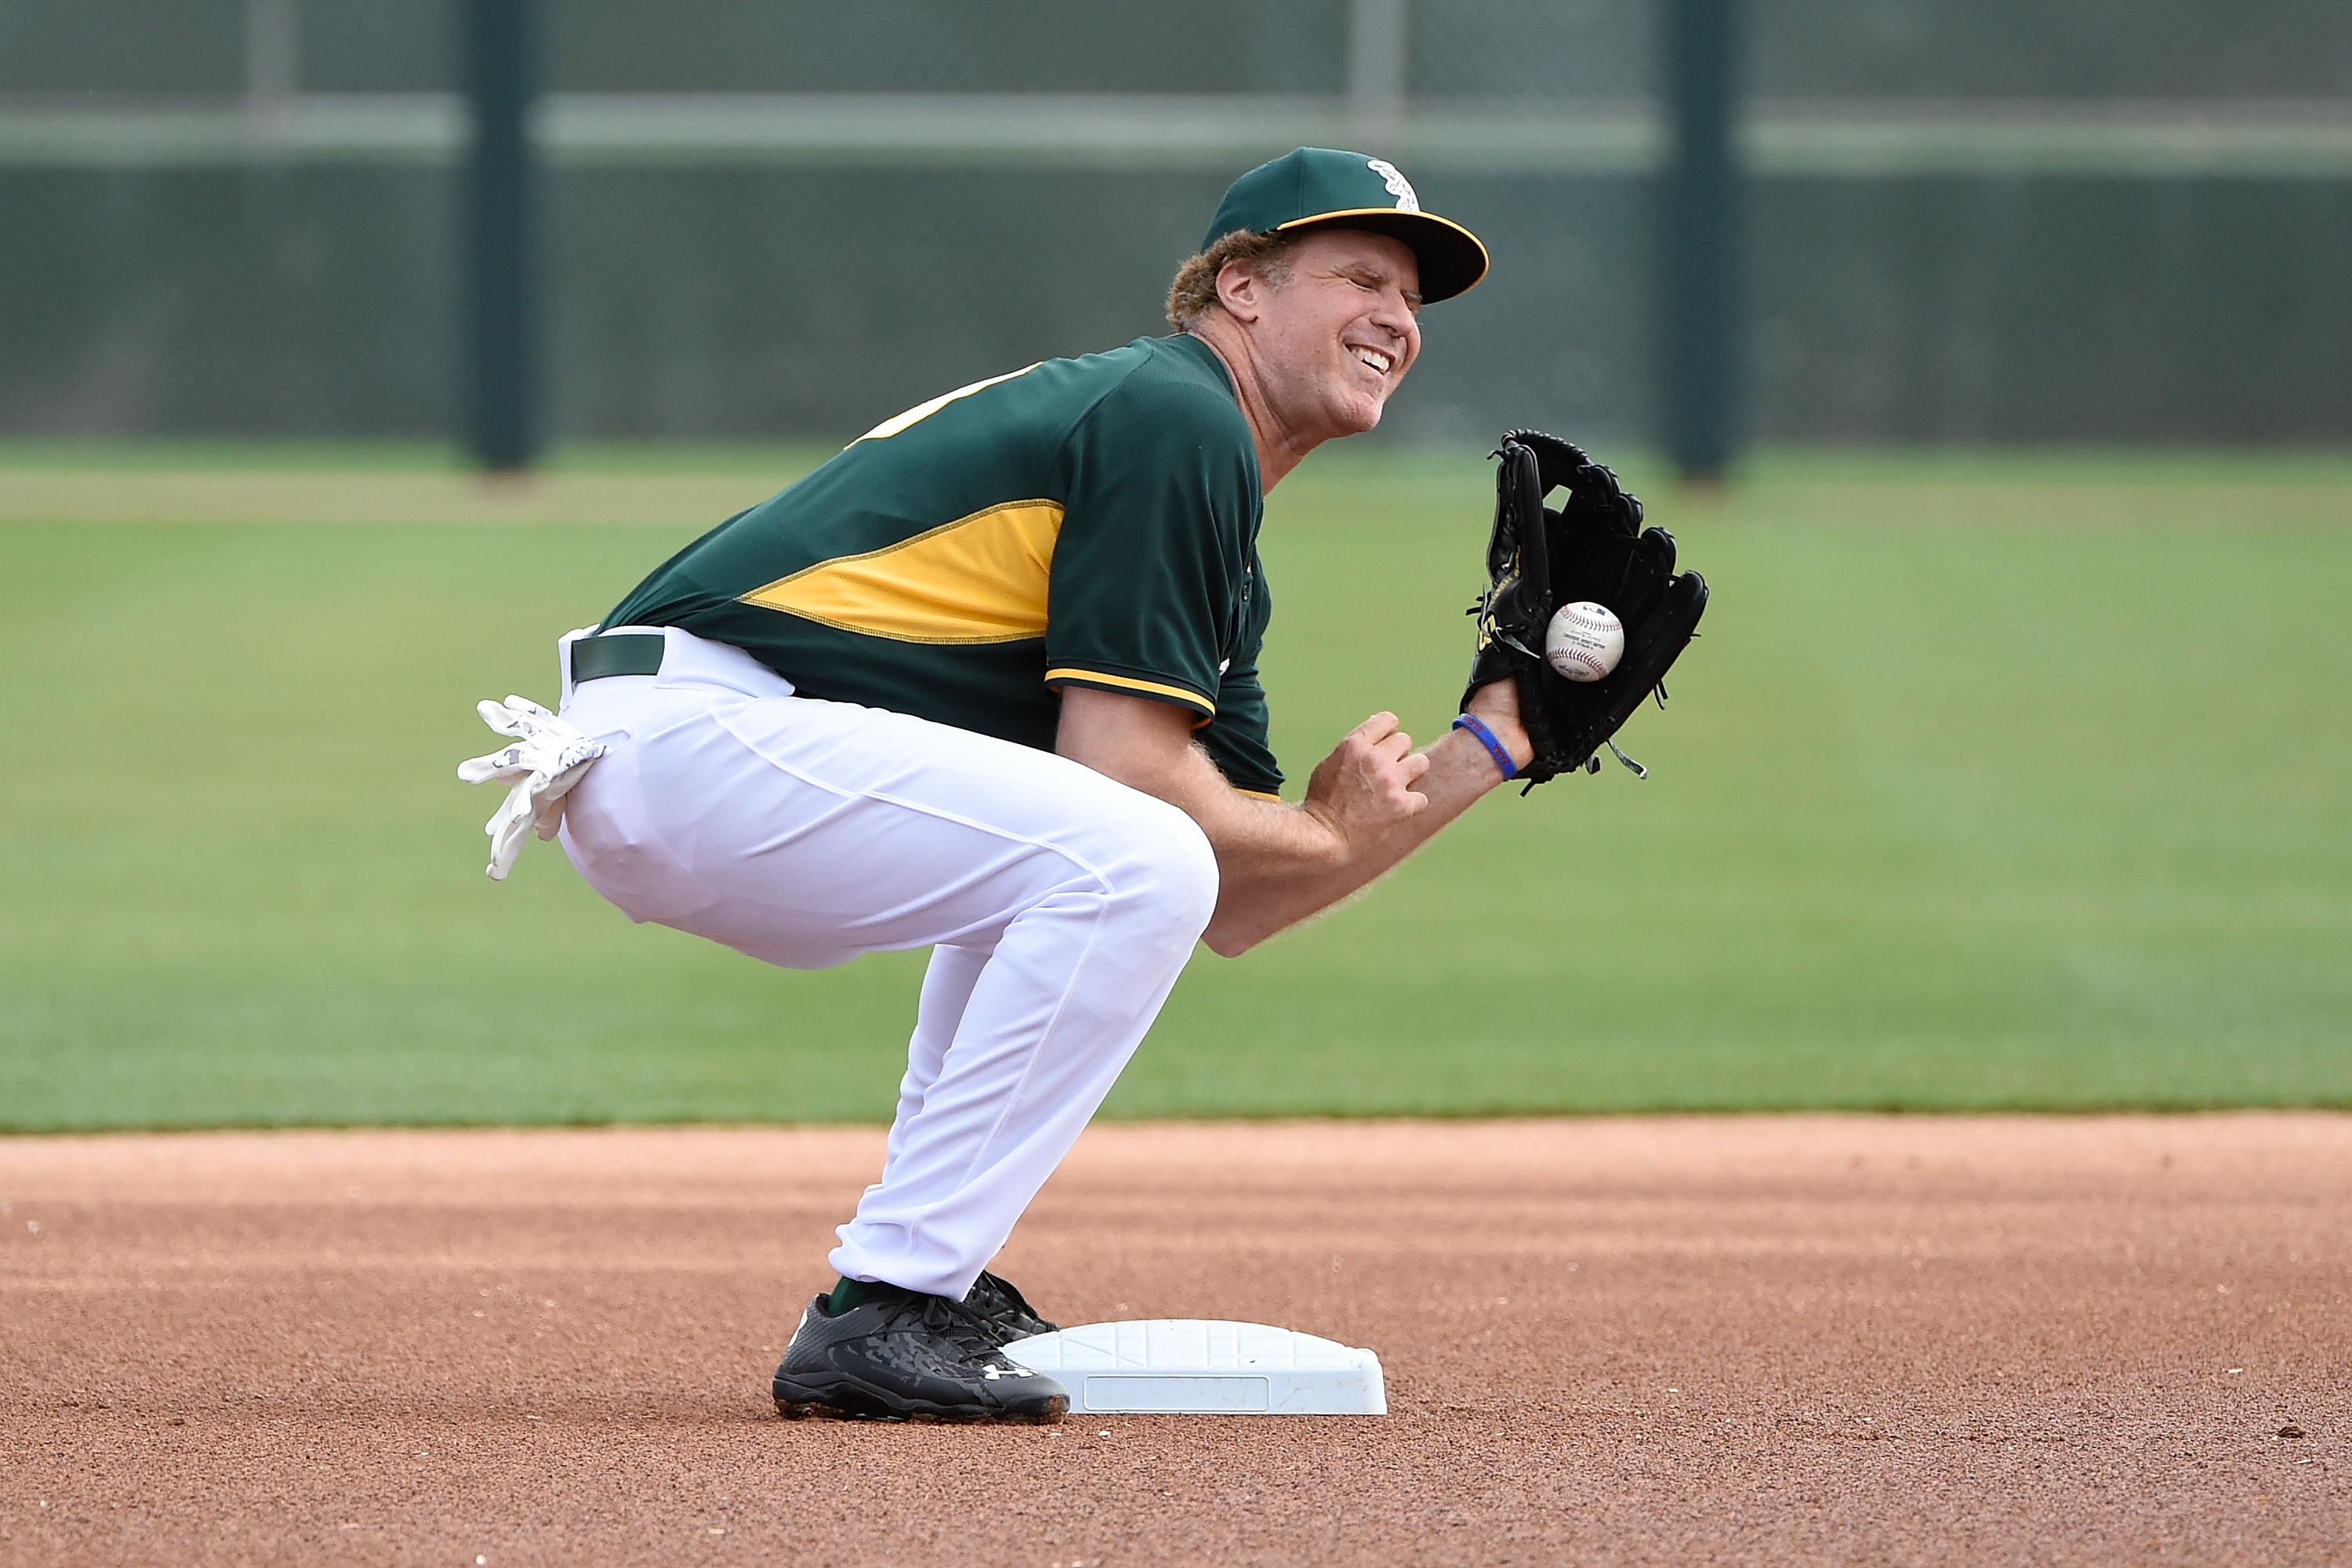 Actor Will Ferrell plays with the Oakland Athletics as they take on the Seattle Mariners as part of a new HBO special from Funny Or Die in partnership with Major League Baseball to support the fight against cancer at HoHoKam Stadium on March 12, 2015 in Mesa, Arizona. (Photo by Lisa Blumenfeld/Getty Images)